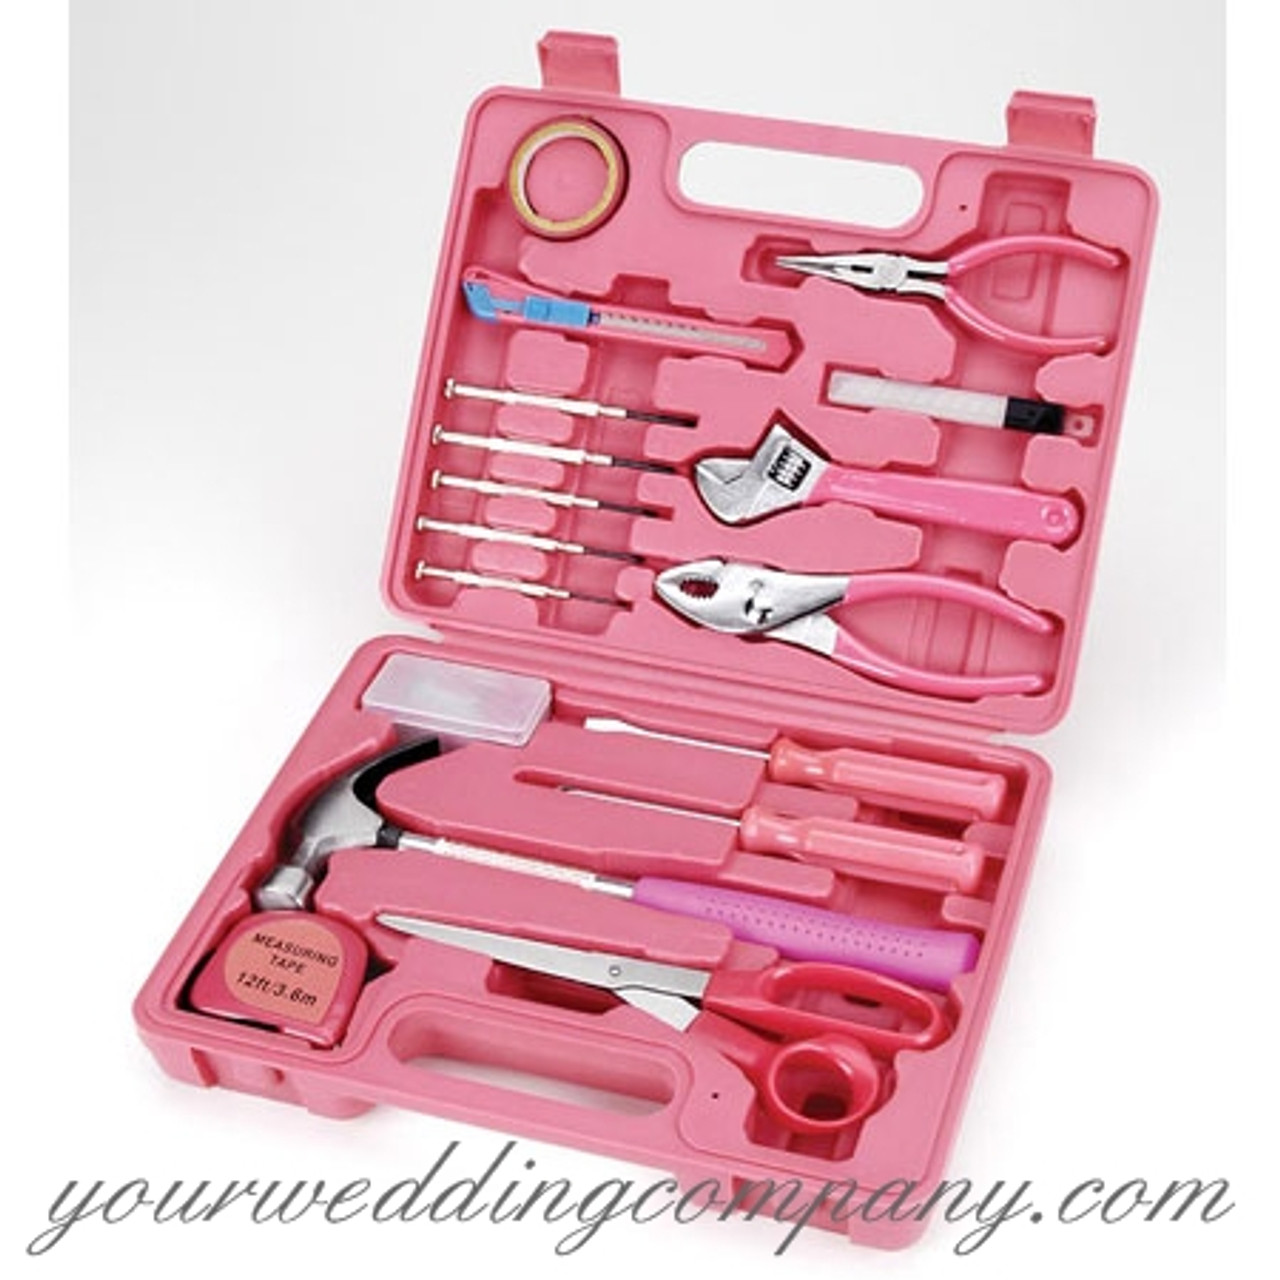  Crafter's Toolkit Round Craft-Clamps, Heavy Duty, 6-Piece, Pink  : Tools & Home Improvement